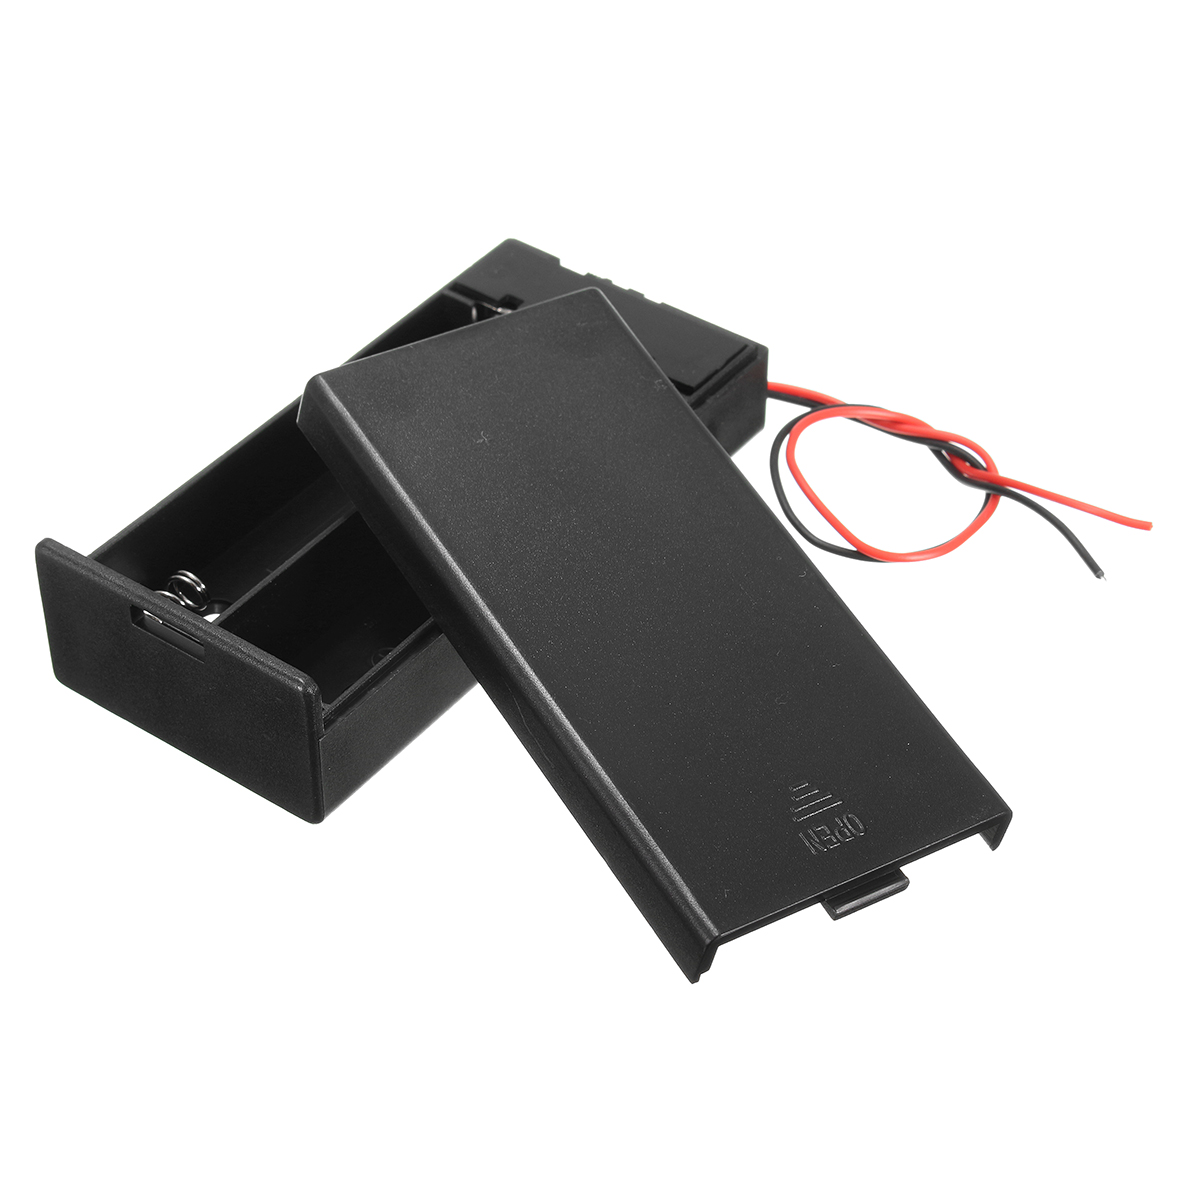 5pcs-Plastic-Battery-Holder-Storage-Box-Case-Container-wONOFF-Switch-For-2x18650-Batteries-37V-1444340